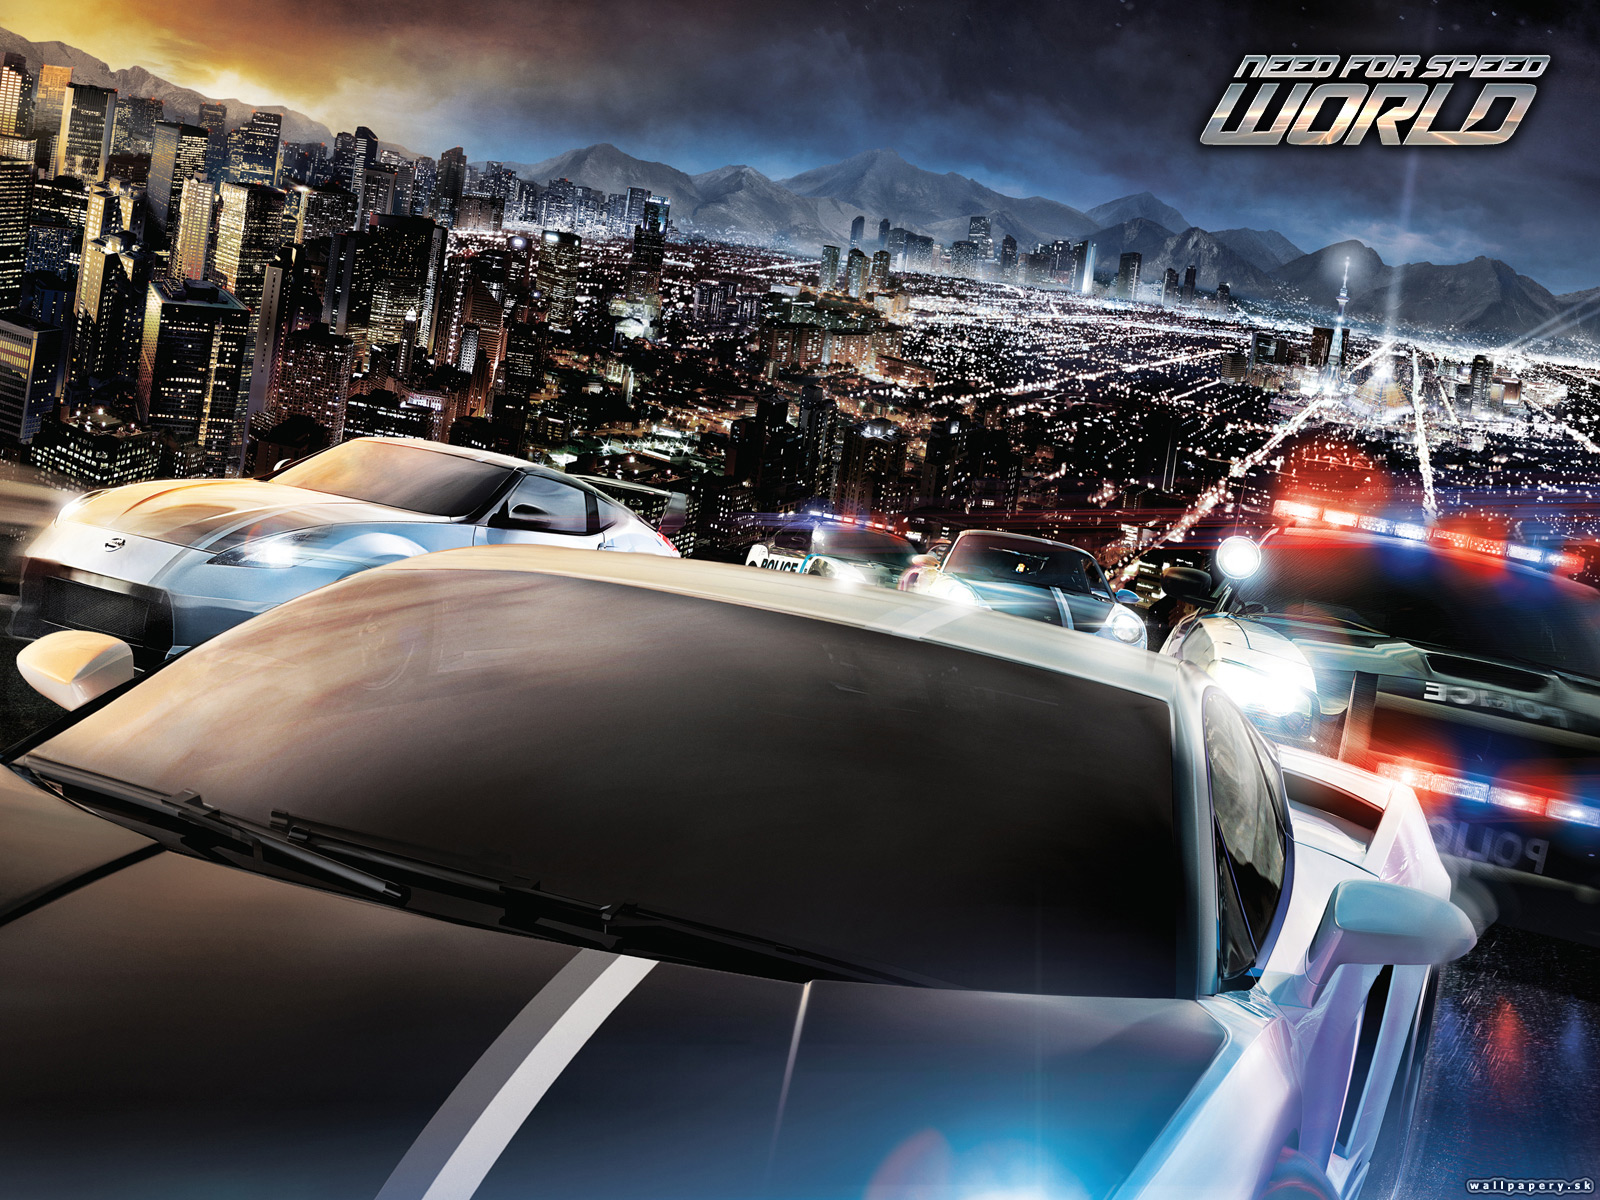 Need for Speed: World - wallpaper 1